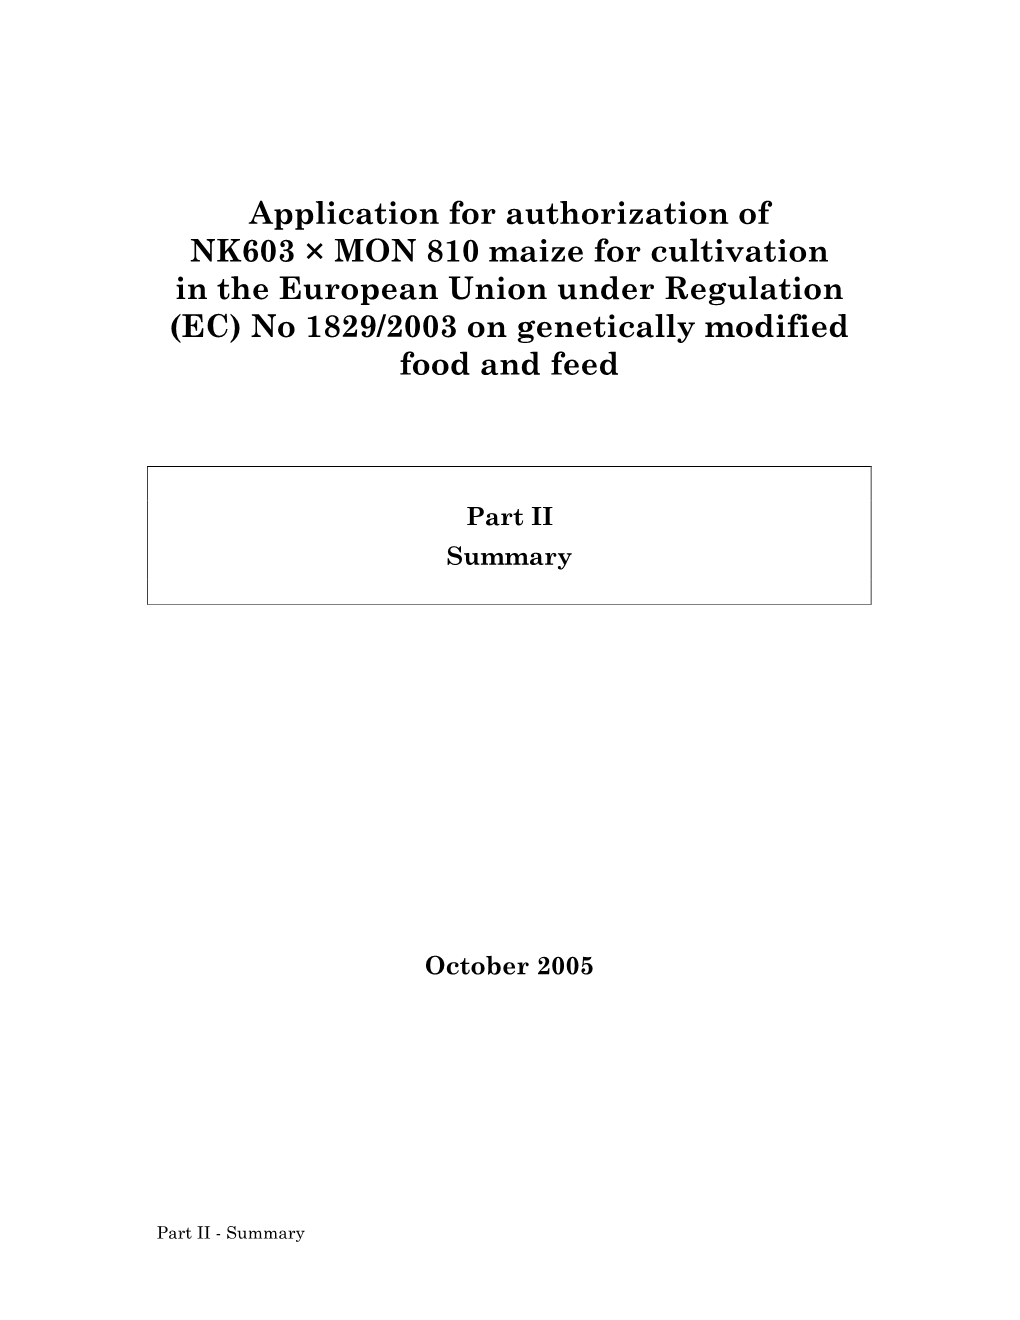 Application for Authorization of NK603 × MON 810 Maize for Cultivation in the European Union Under Regulation (EC) No 1829/2003 on Genetically Modified Food and Feed